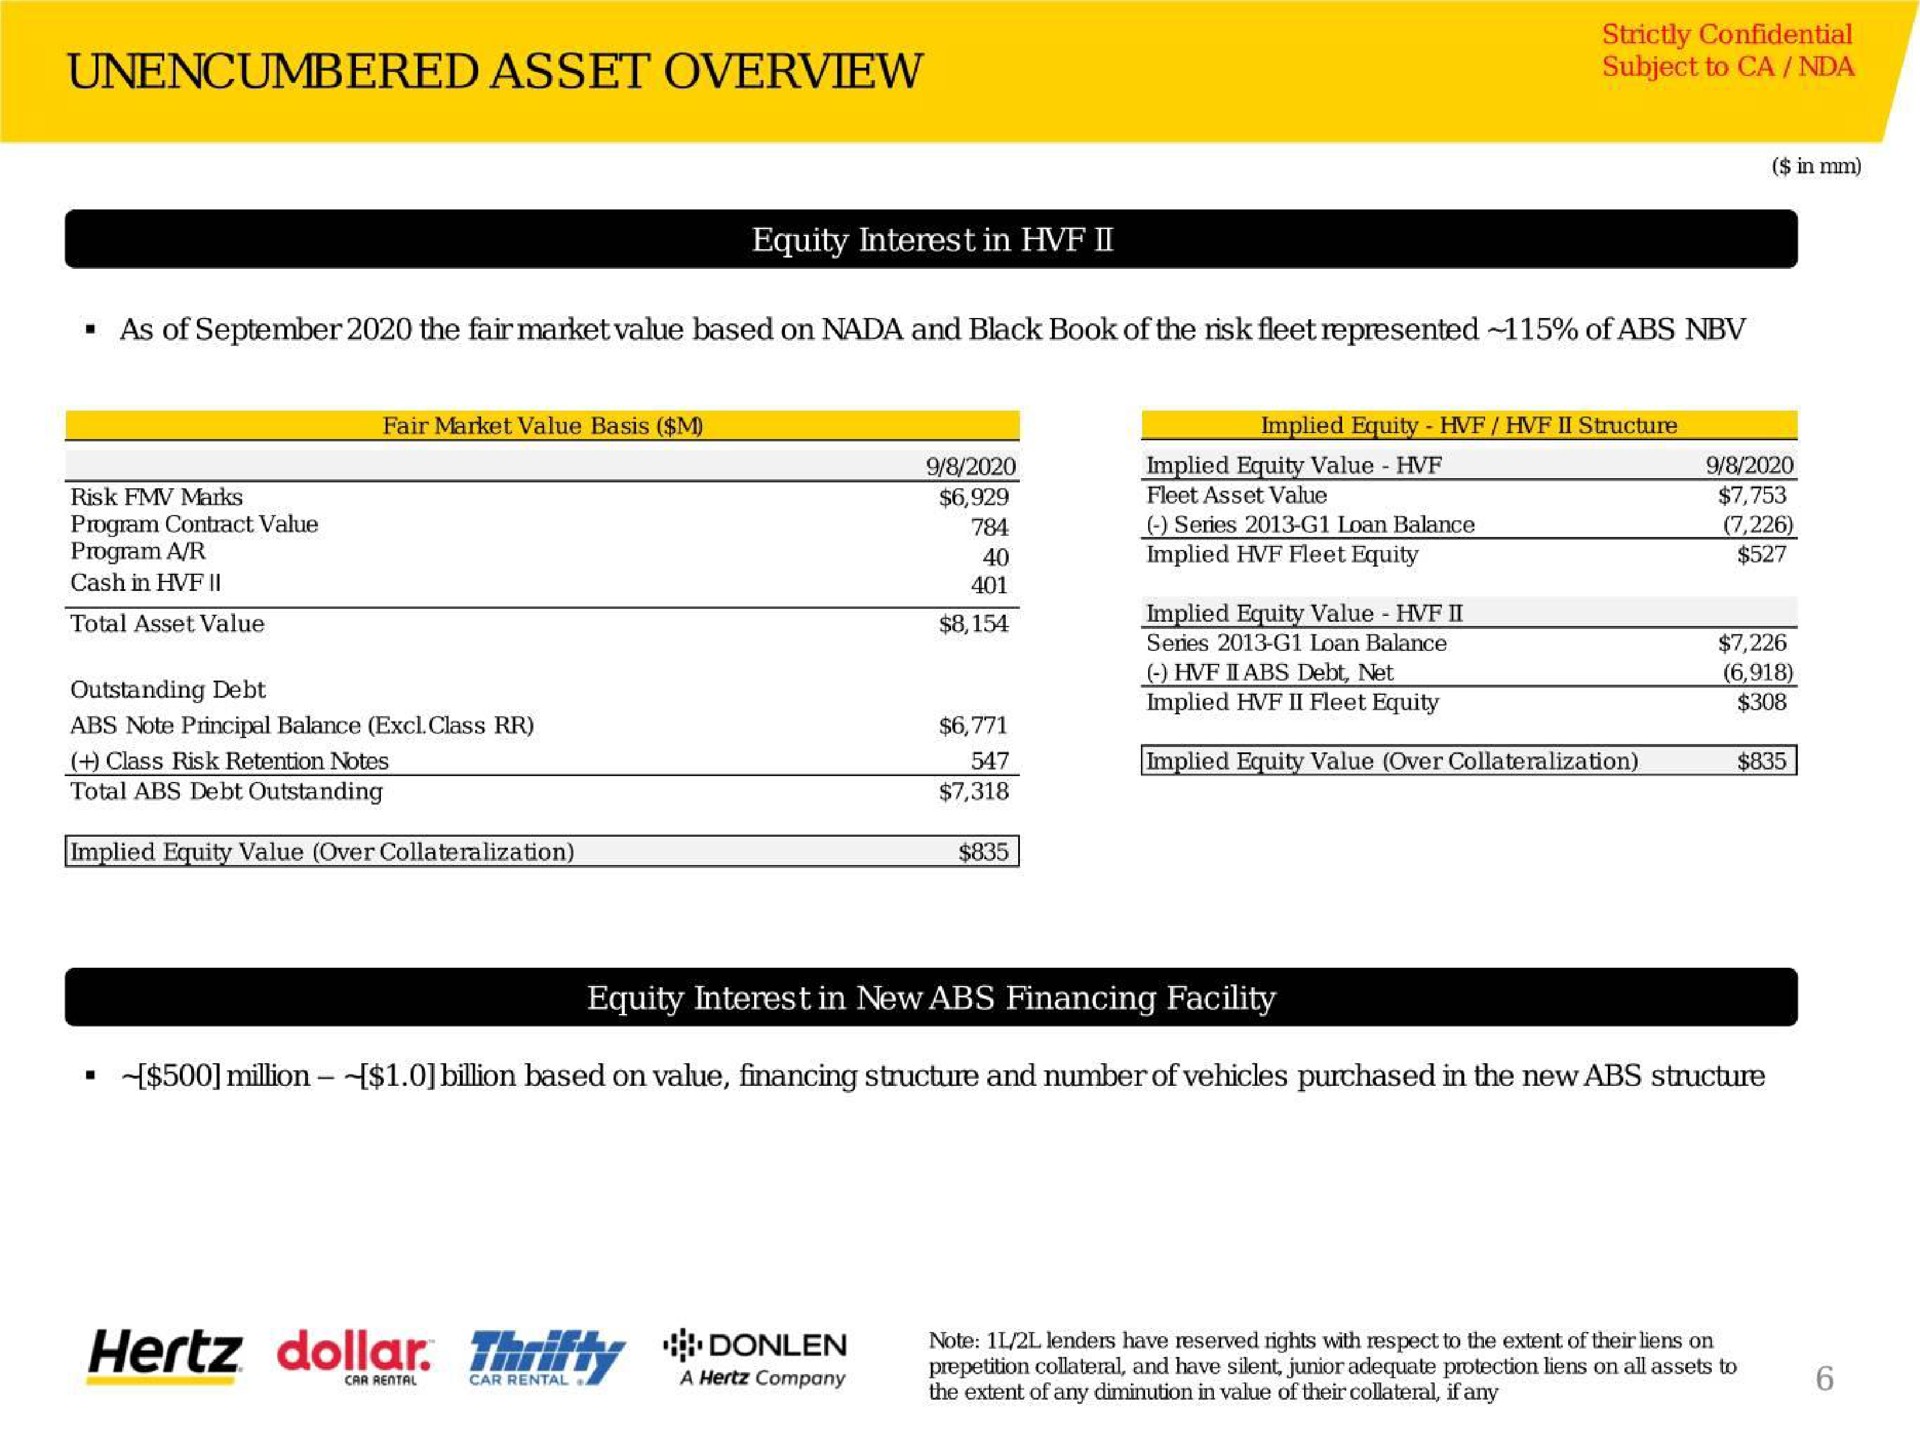 unencumbered asset overview subject to total implied equity value | Hertz